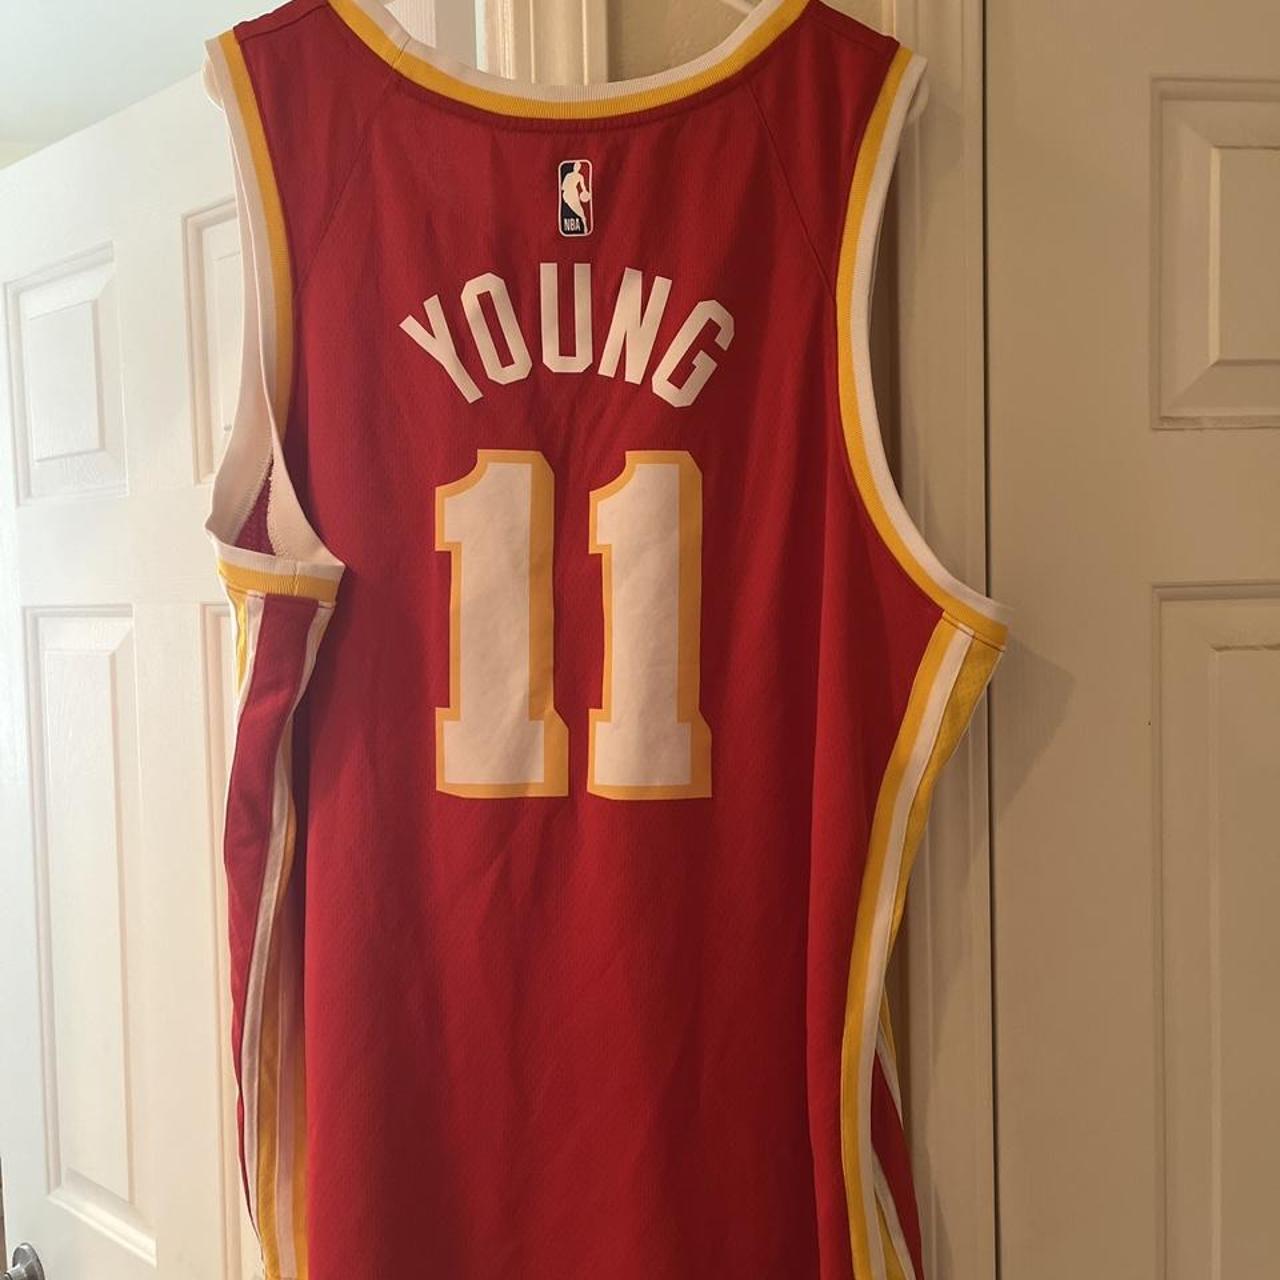 This authentic Nike Atlanta Hawks Trae Young jersey - Depop